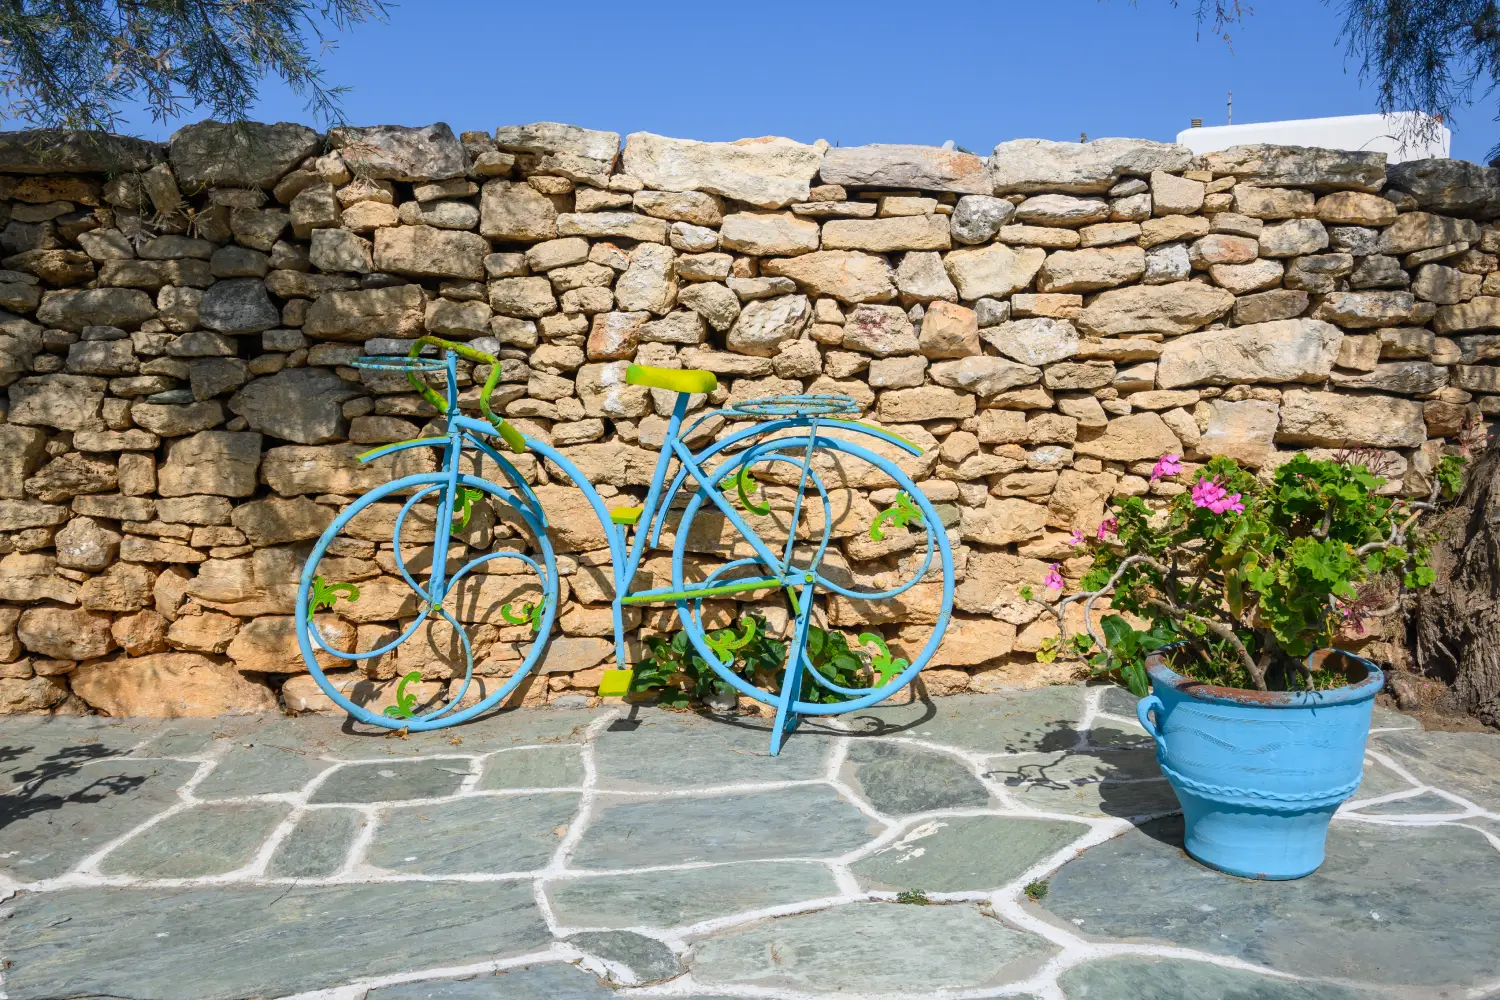 Ferry to Folegandros - Decorative bicycle parked on street in the town of Chora on the island of Folegandros Cyclades, Greece.